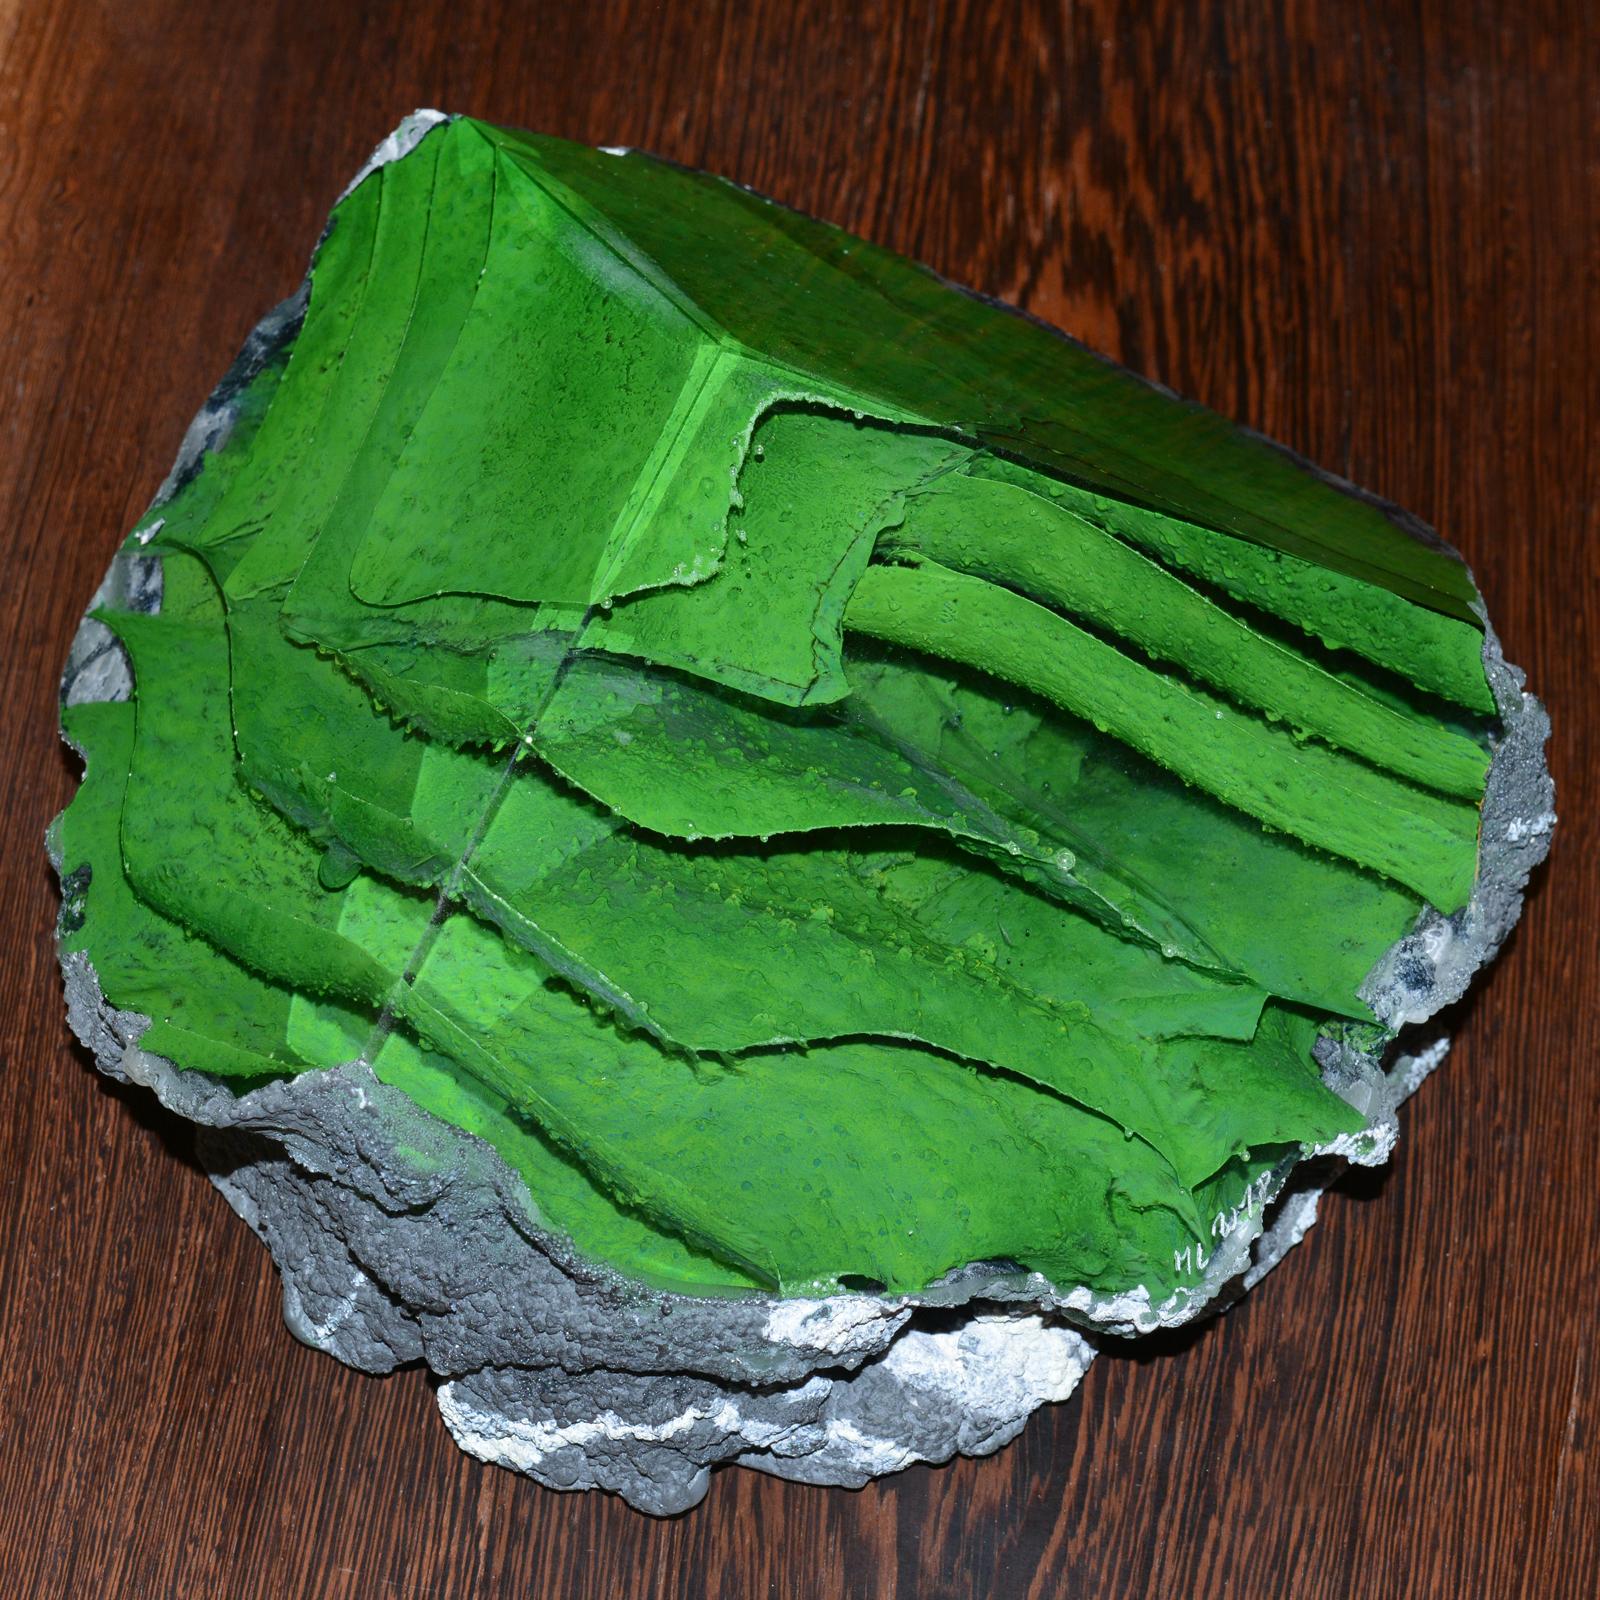 Sculpture glass alchemy green made with
Glass paste, with strips glass paste polished 
and molded, colored with pigments in green 
powder and casted on a raw stone base. 
Exceptional and unique piece. Made in France in 2018.
piece is